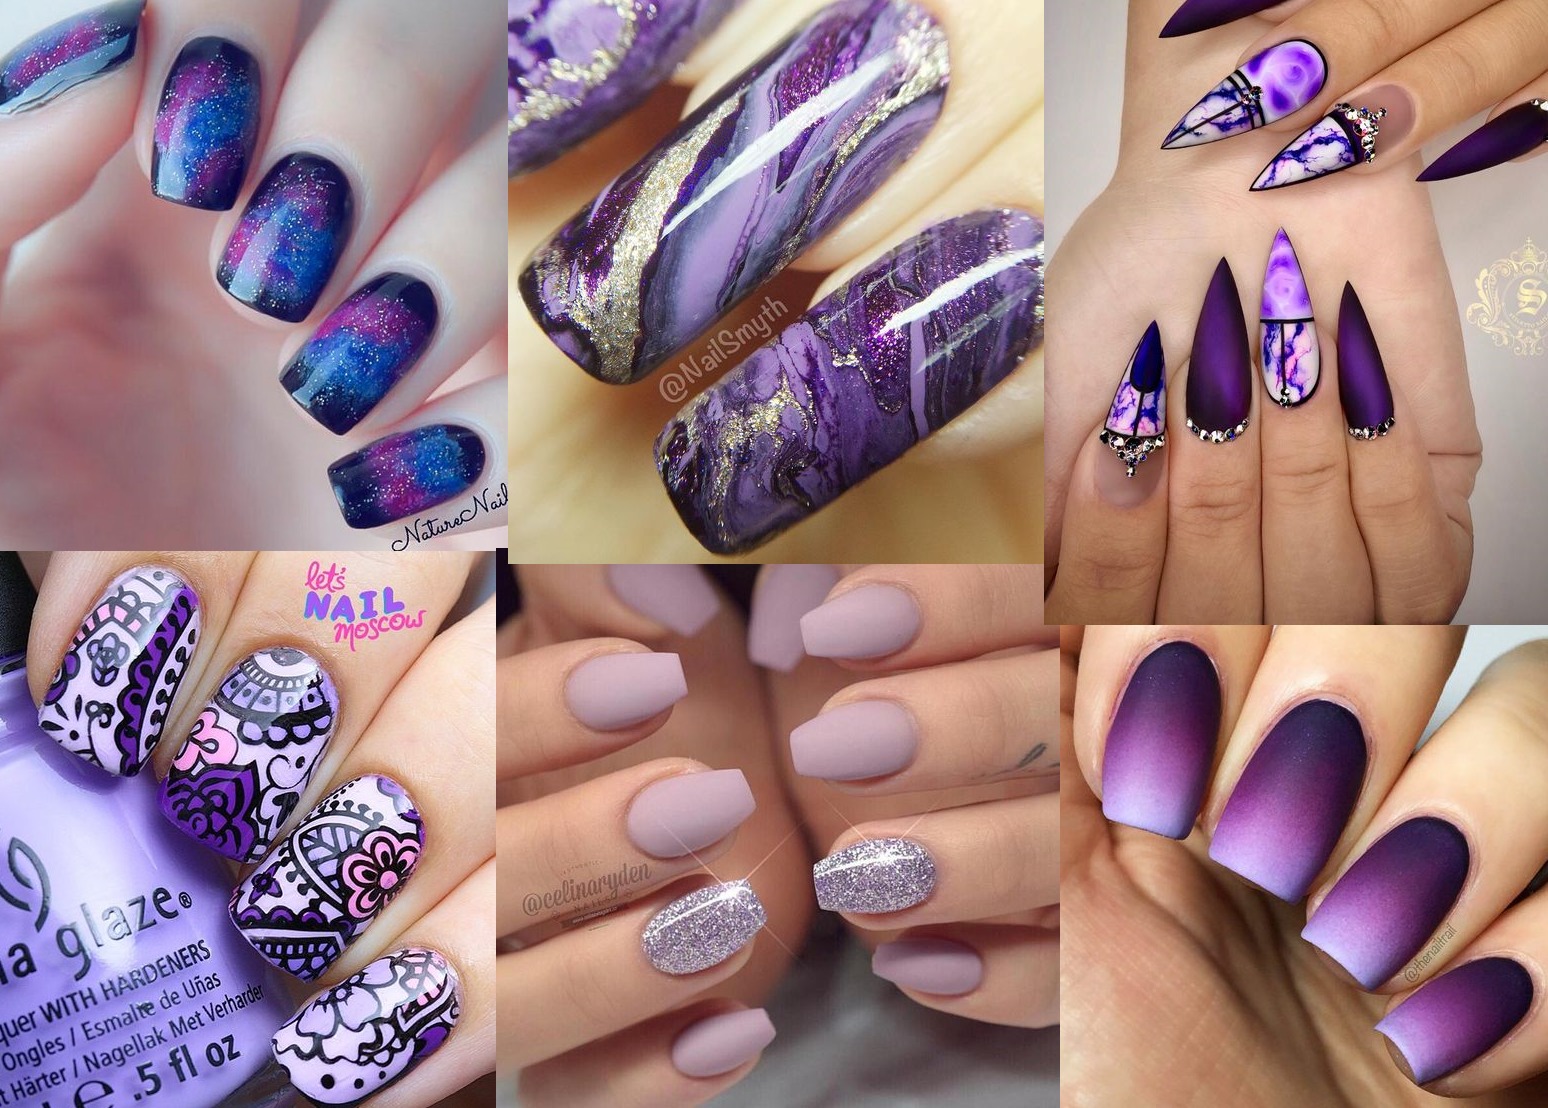 9. Black and Purple Abstract Nail Art - wide 4